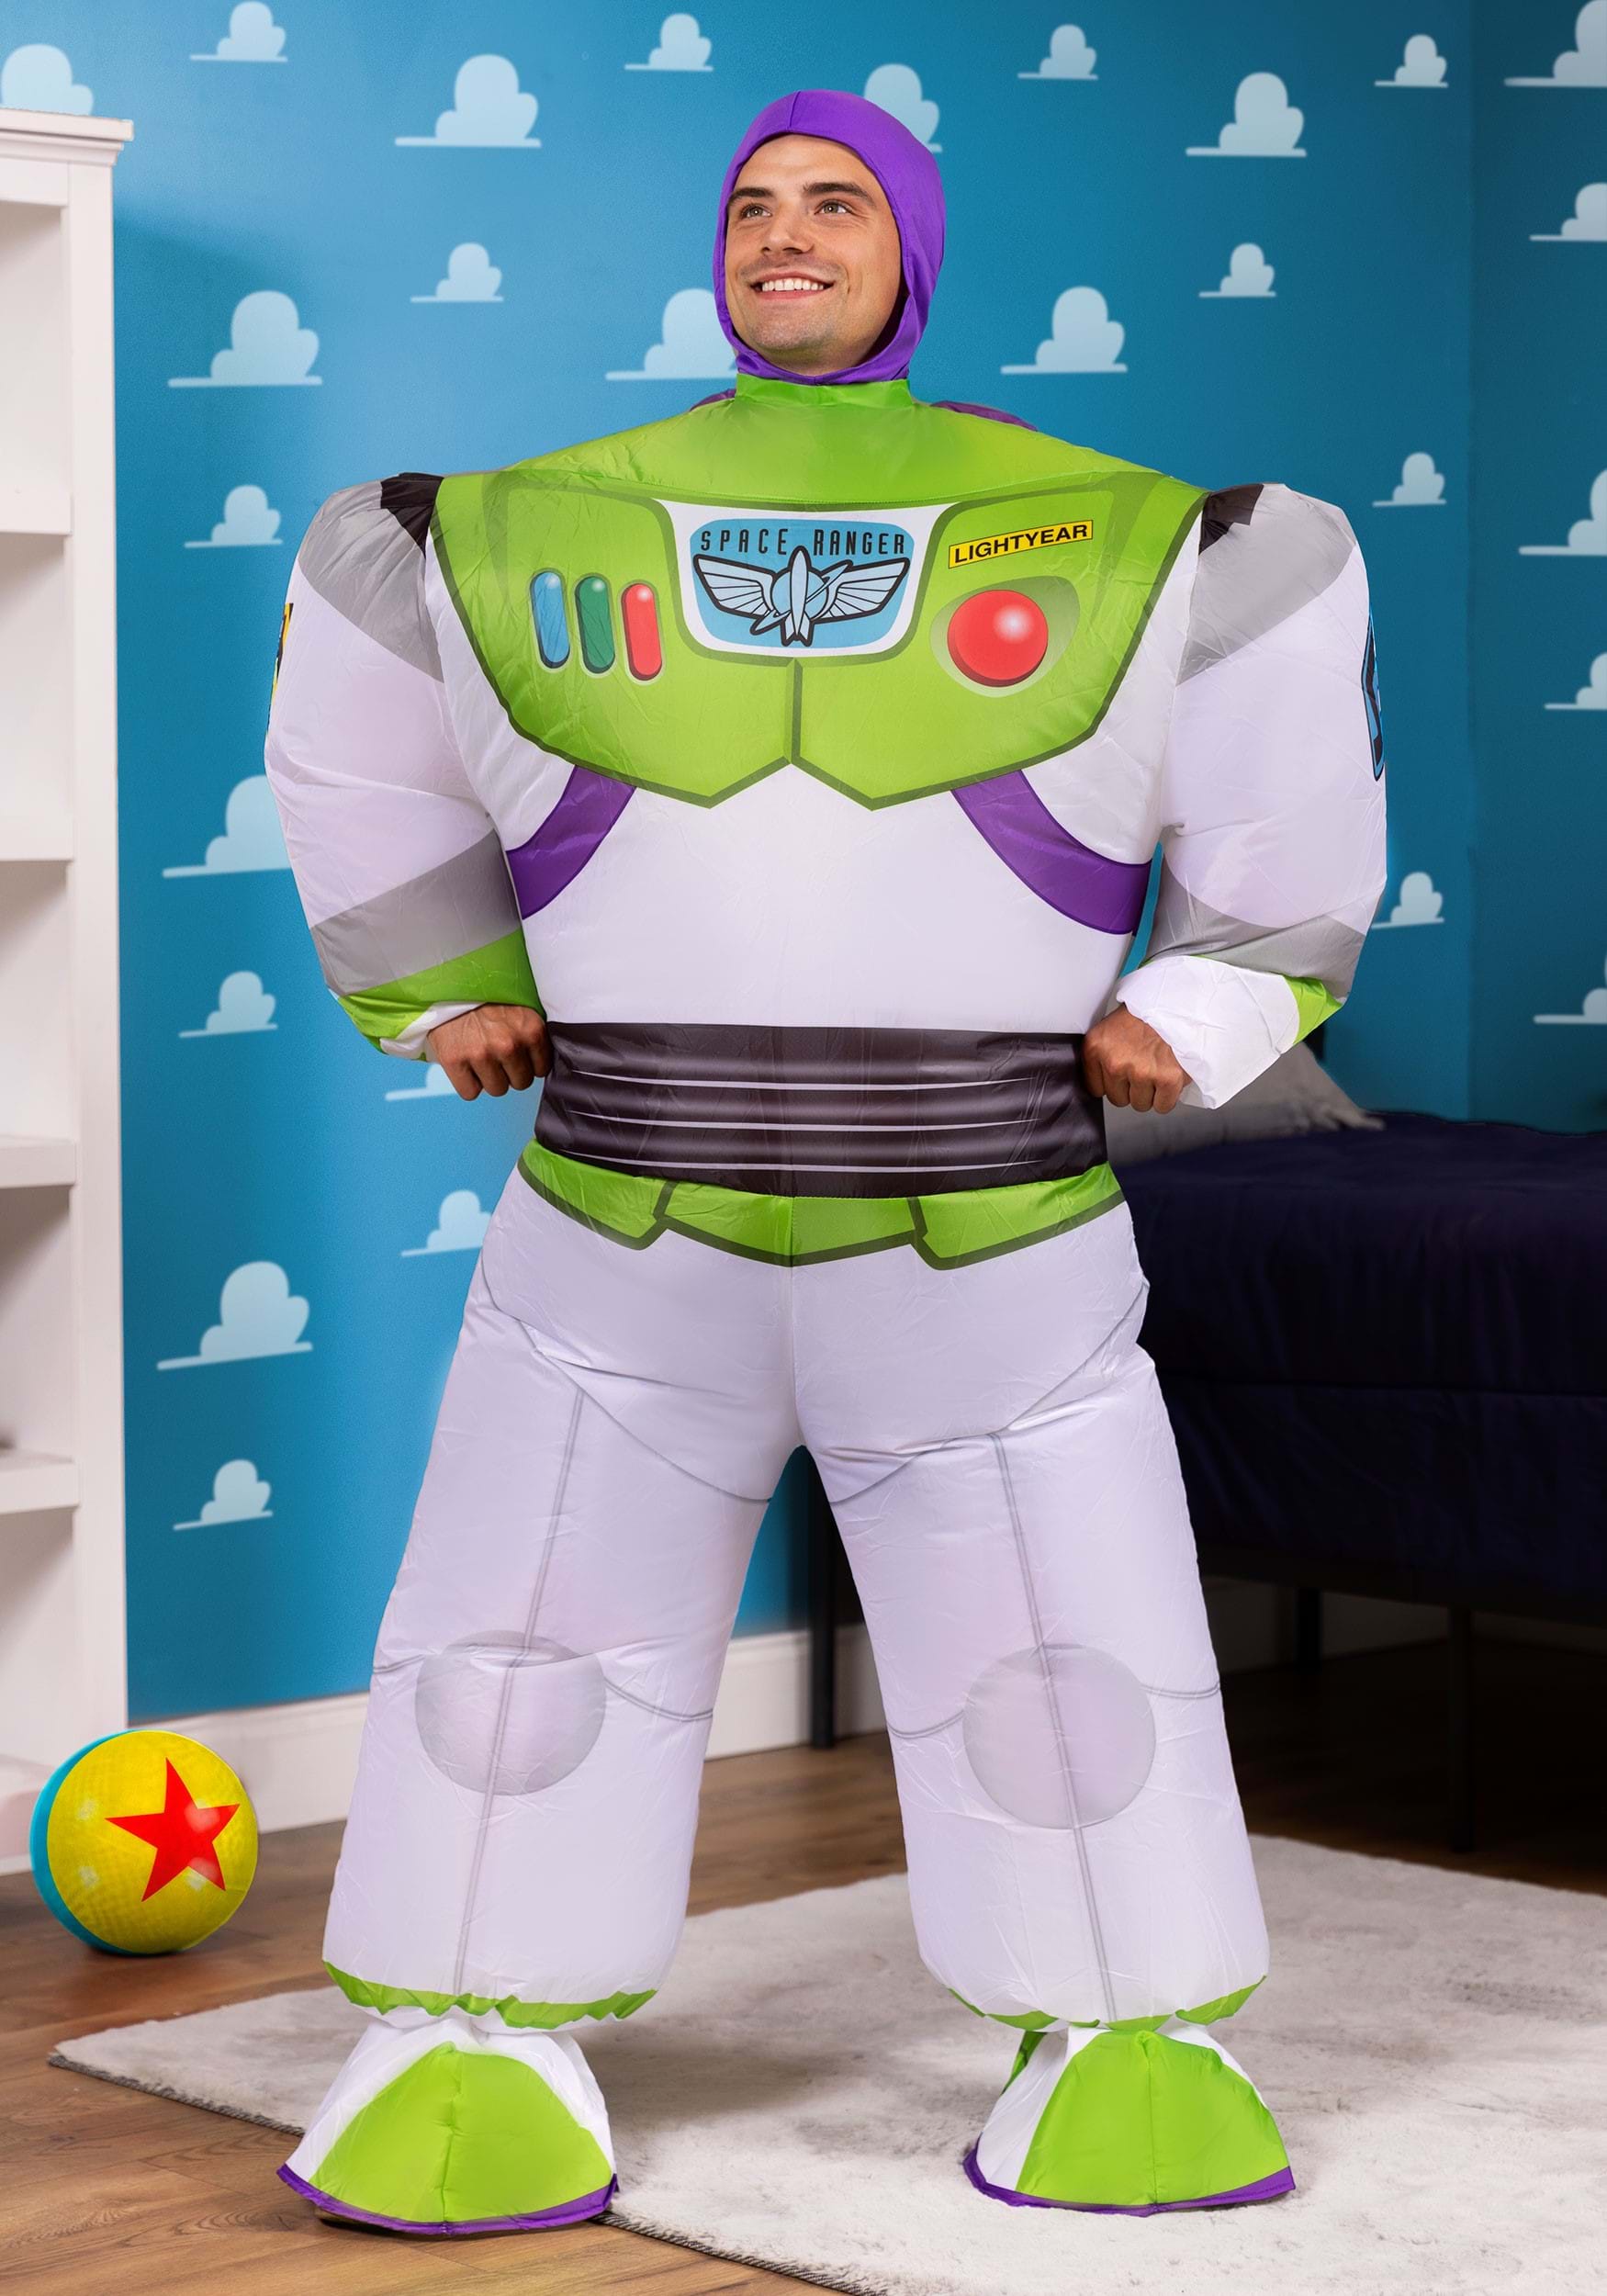 https://images.fun.com/products/59154/1-1/toy-story-buzz-lightyear-adult-inflatable-costume-update.jpg